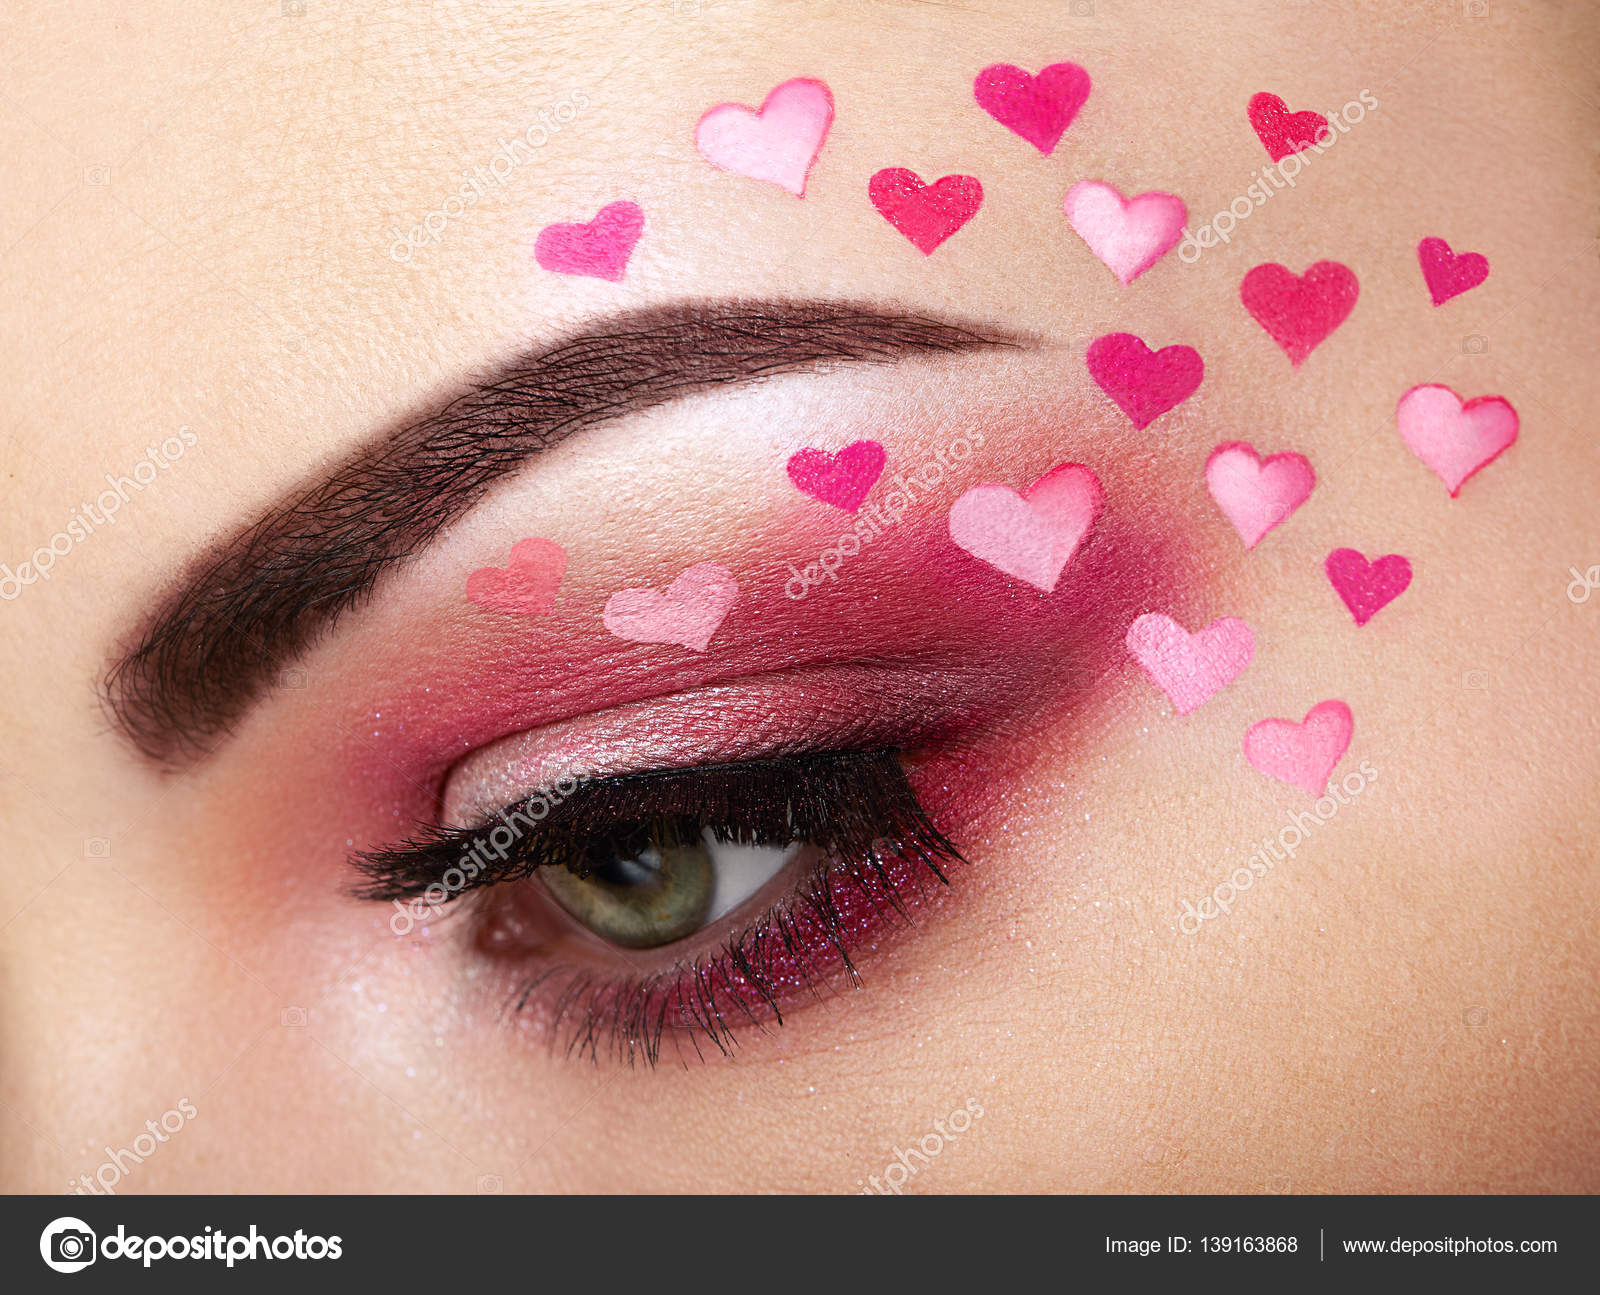 Eye make-up girl with a heart Photo by ©heckmannoleg 139163868